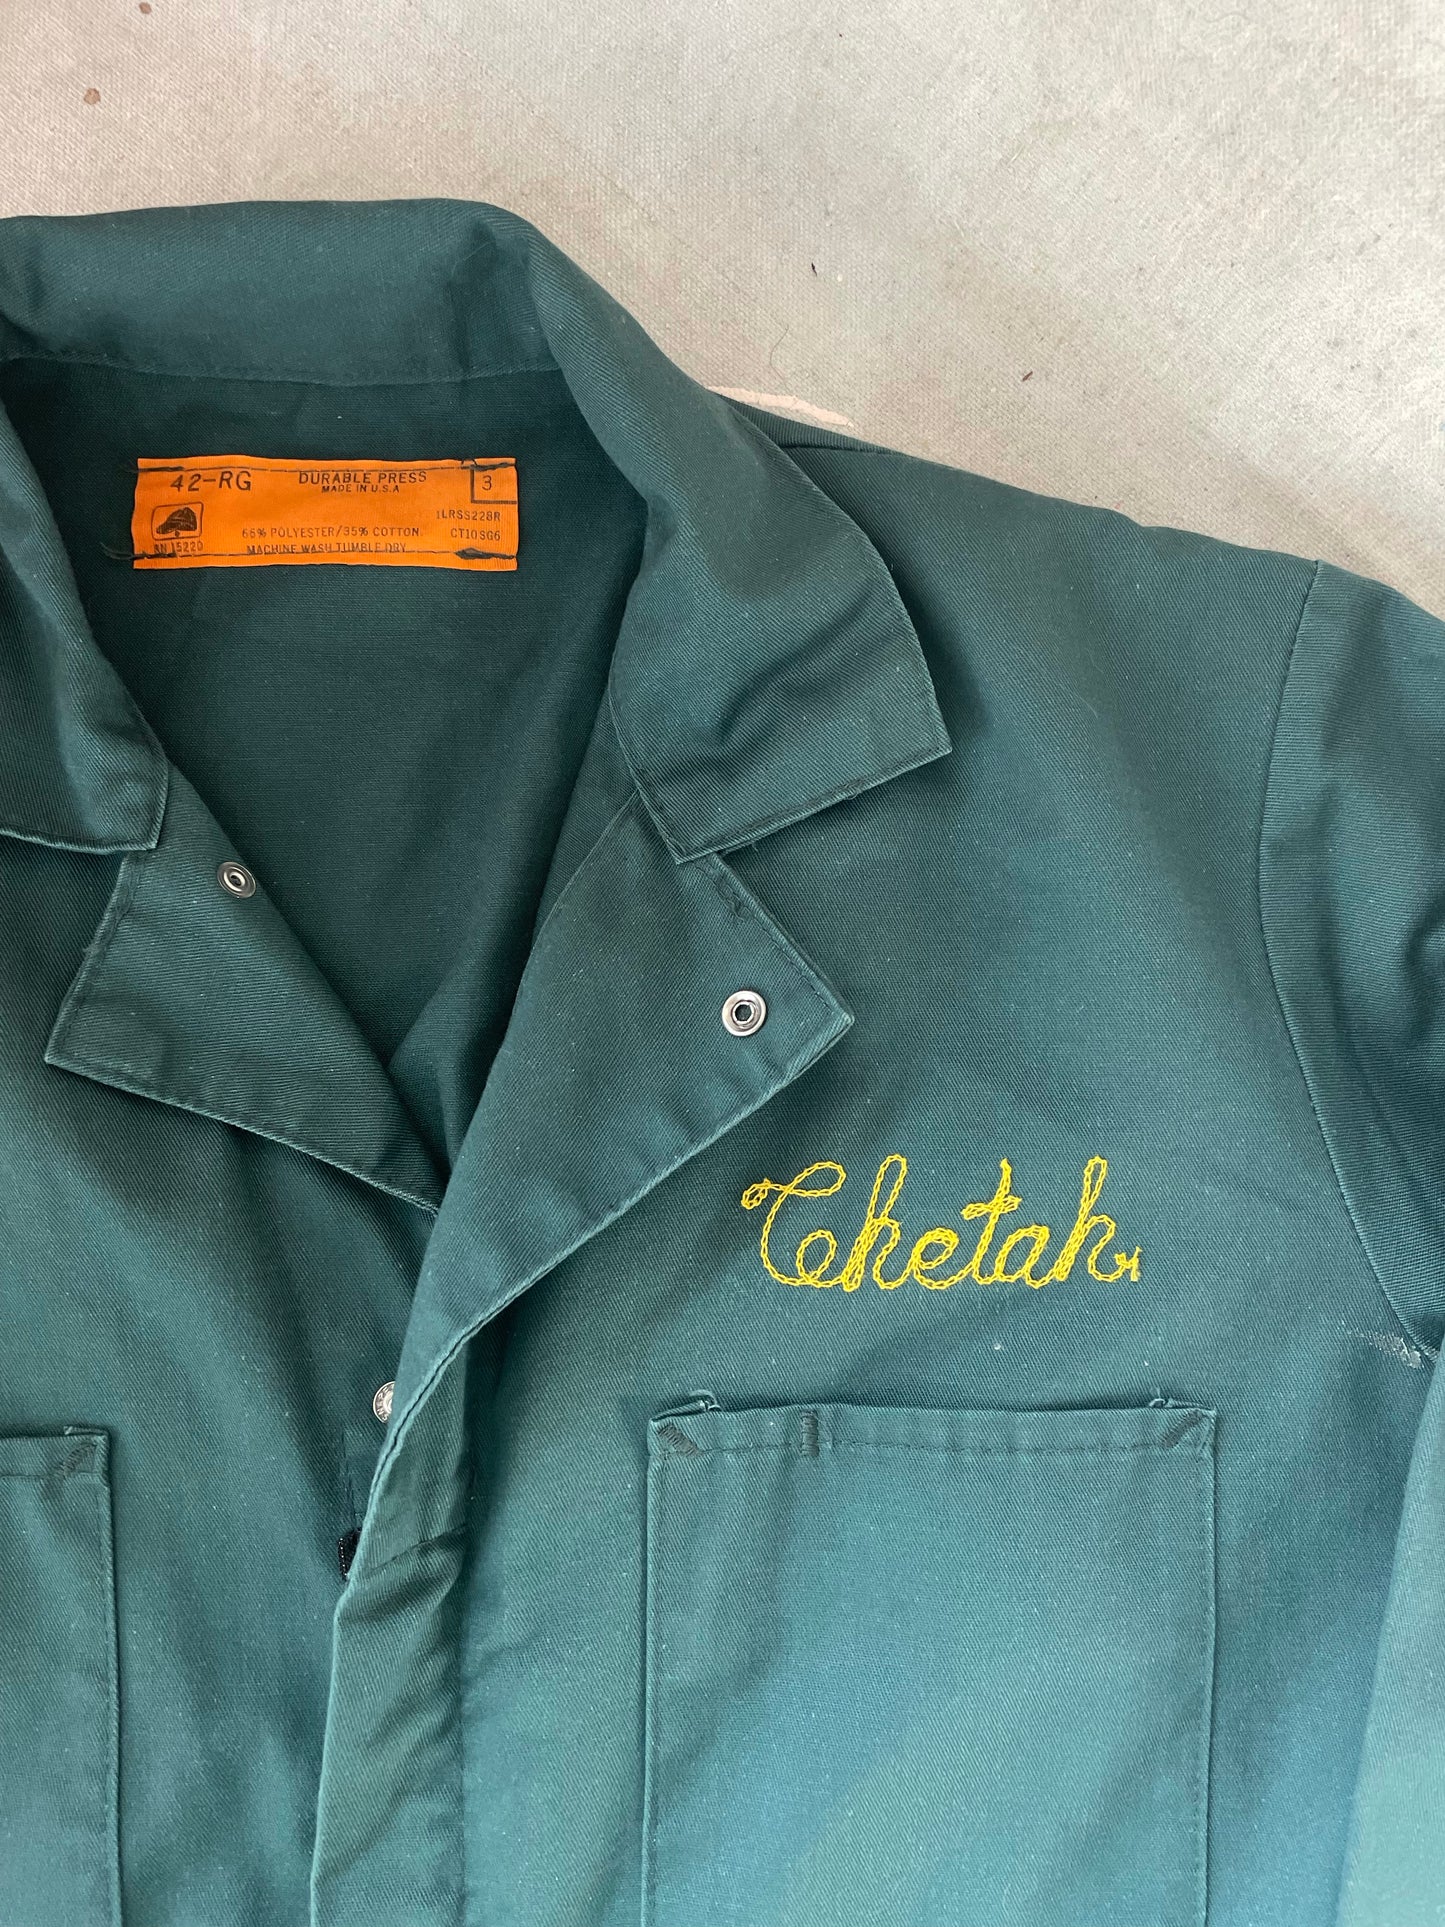 80s “Chetah” Embroidered Coveralls